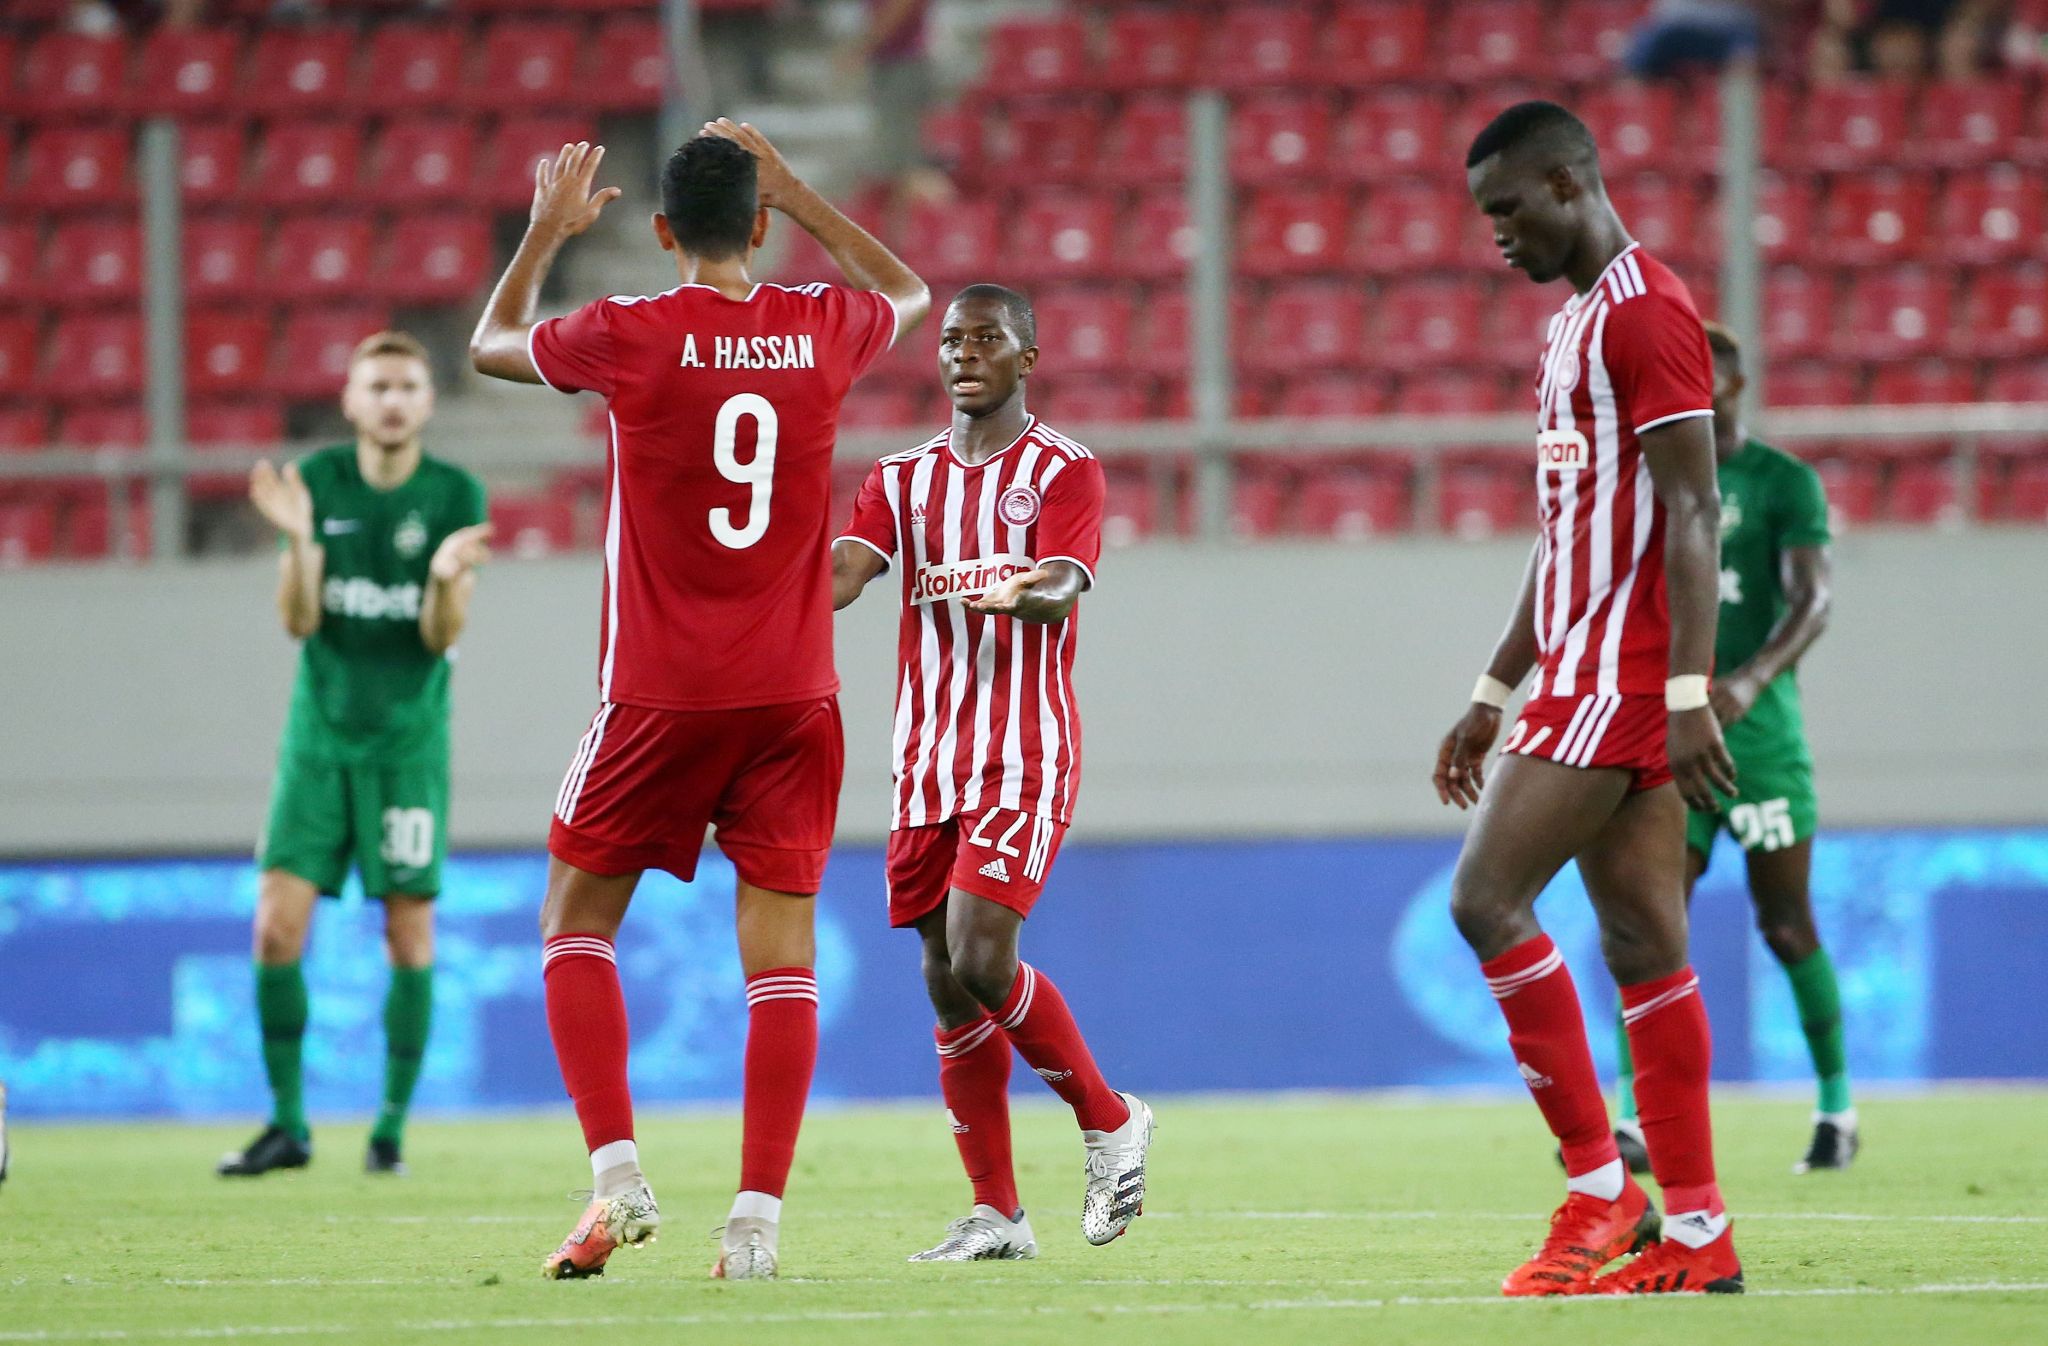 Olympiacos remained undefeated